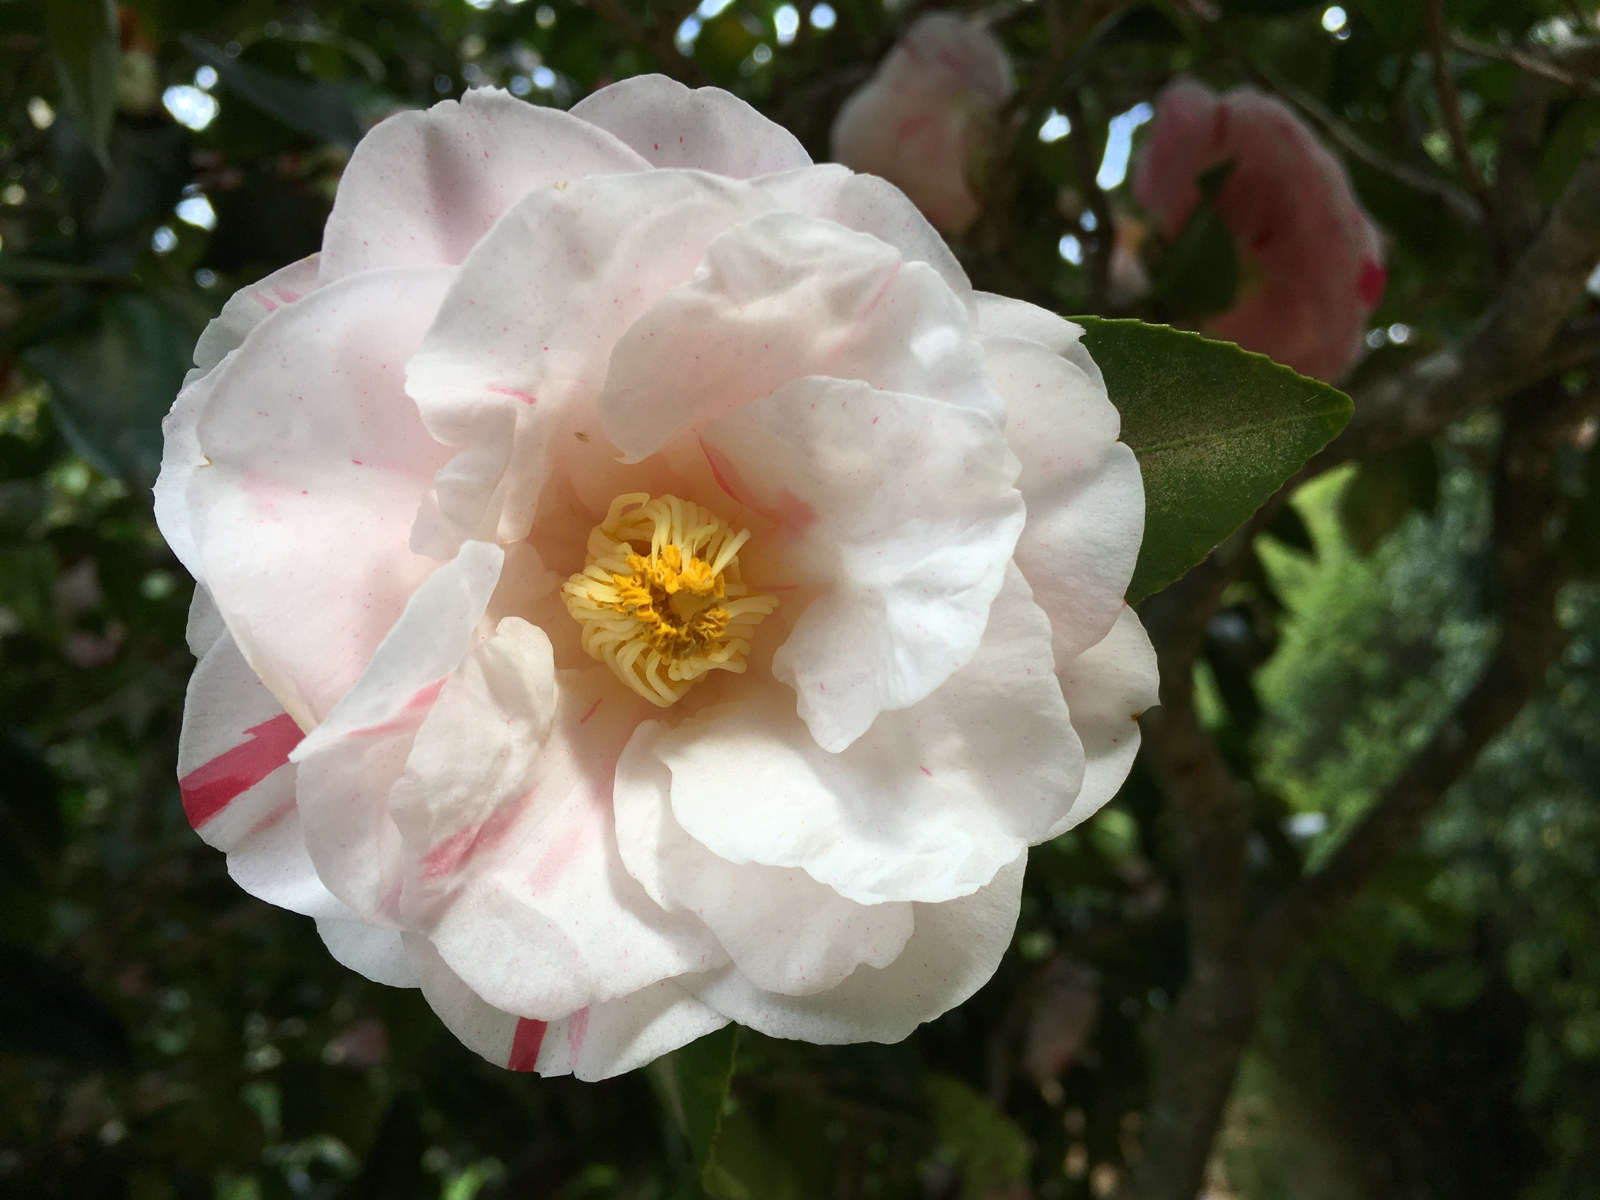 Camellia japonica 'Jean Lyne' at Vaucluse House